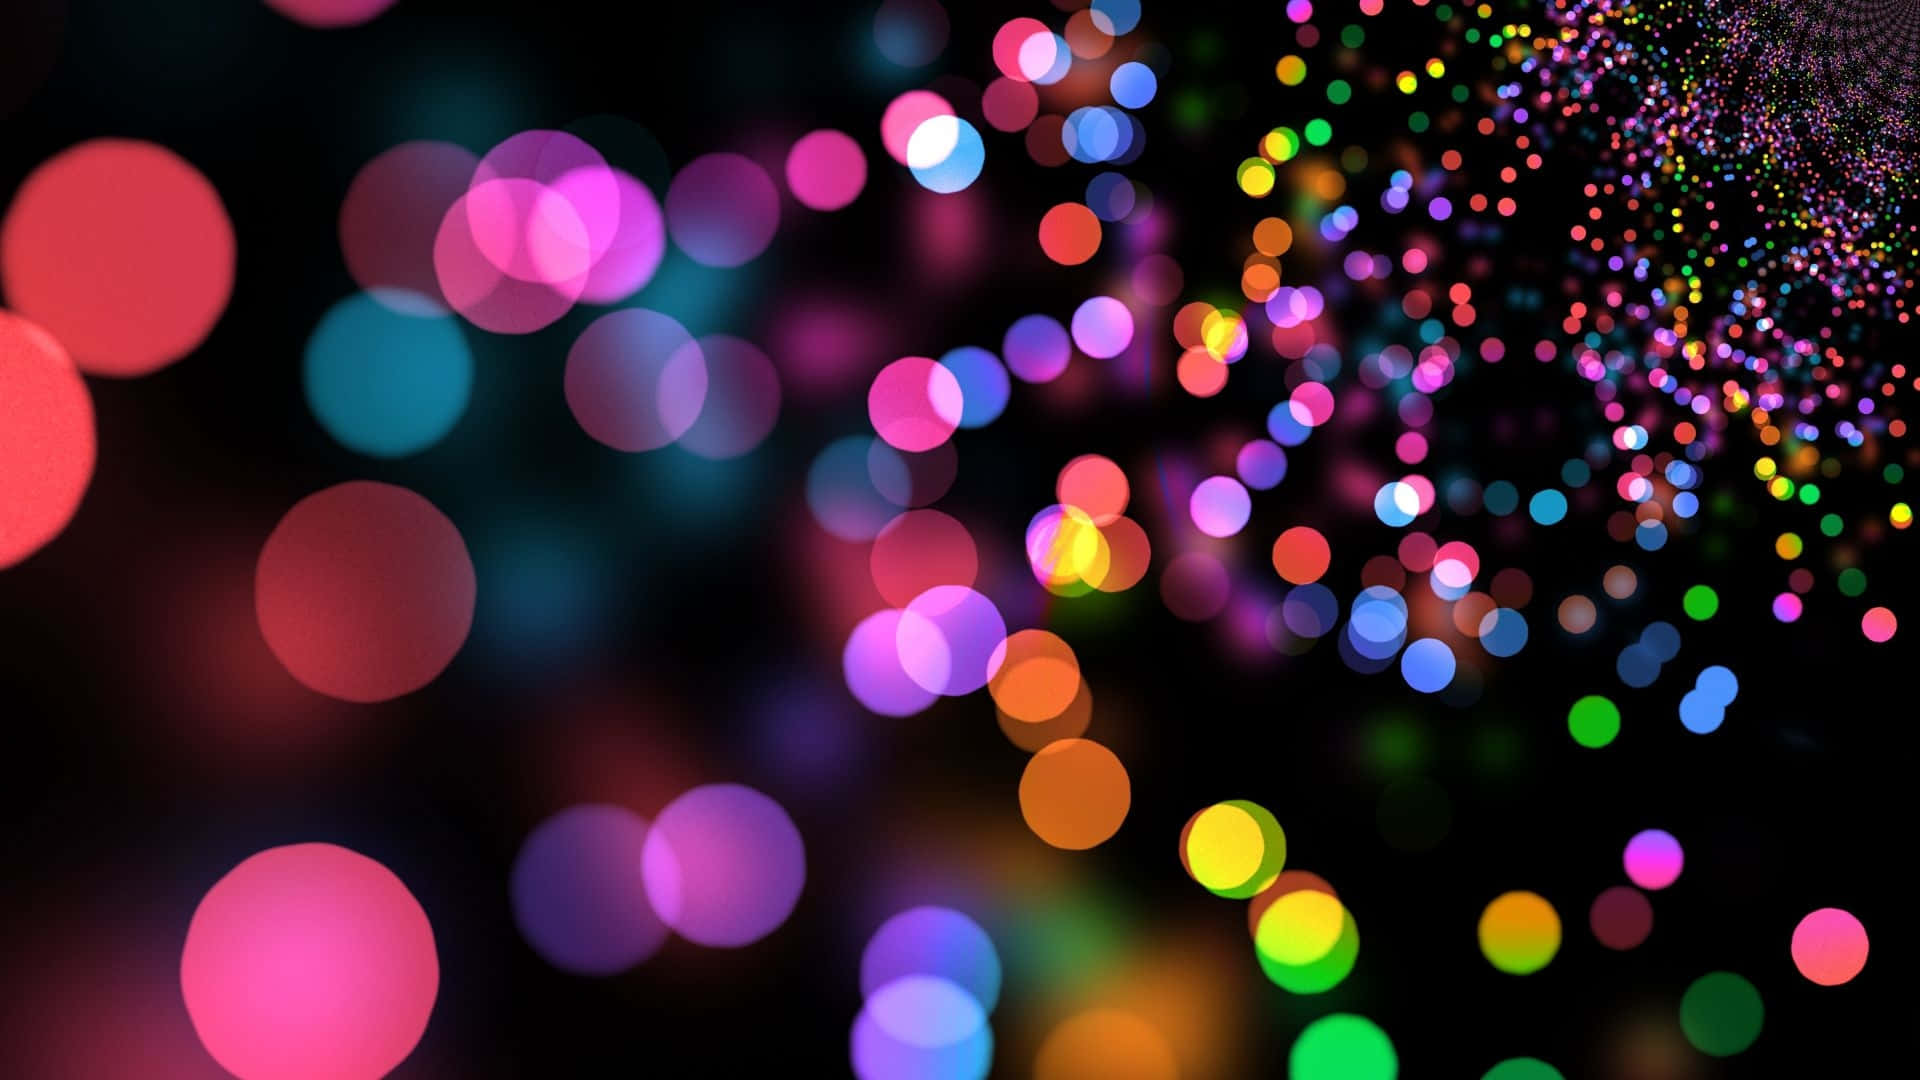 A Colorful Background With A Lot Of Lights